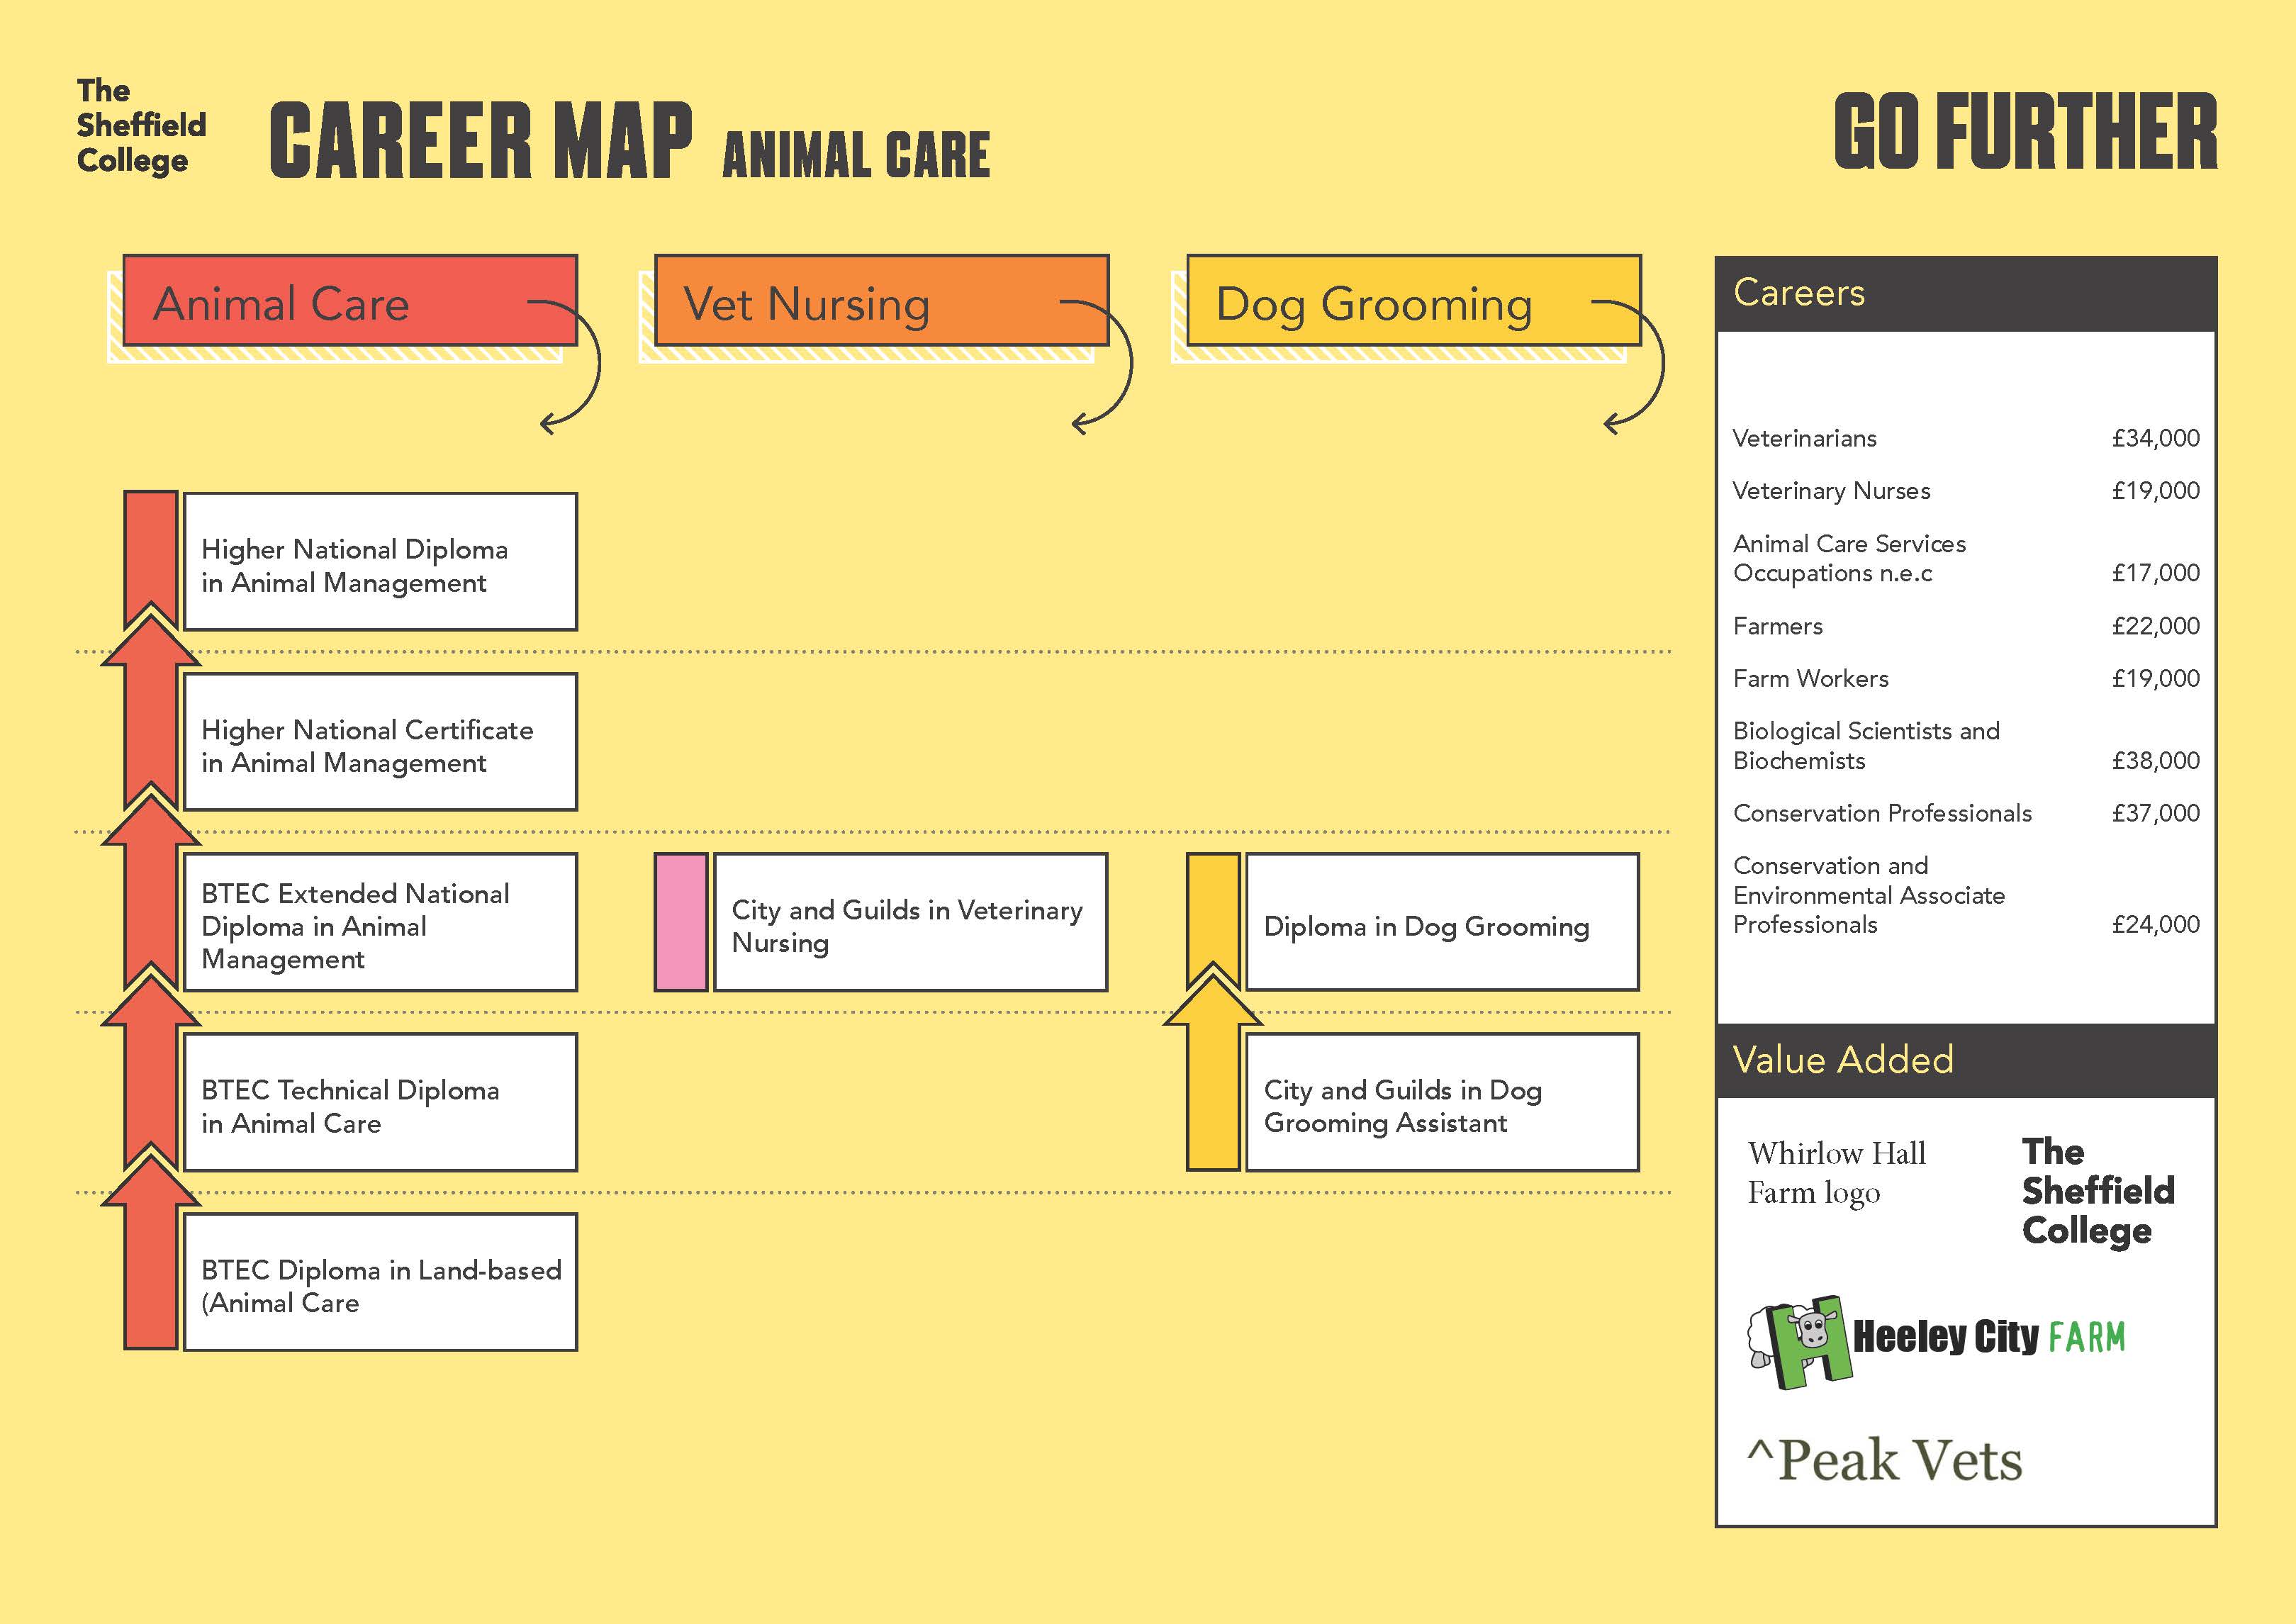 Diagram showing progression through study for animal care into relevant careers